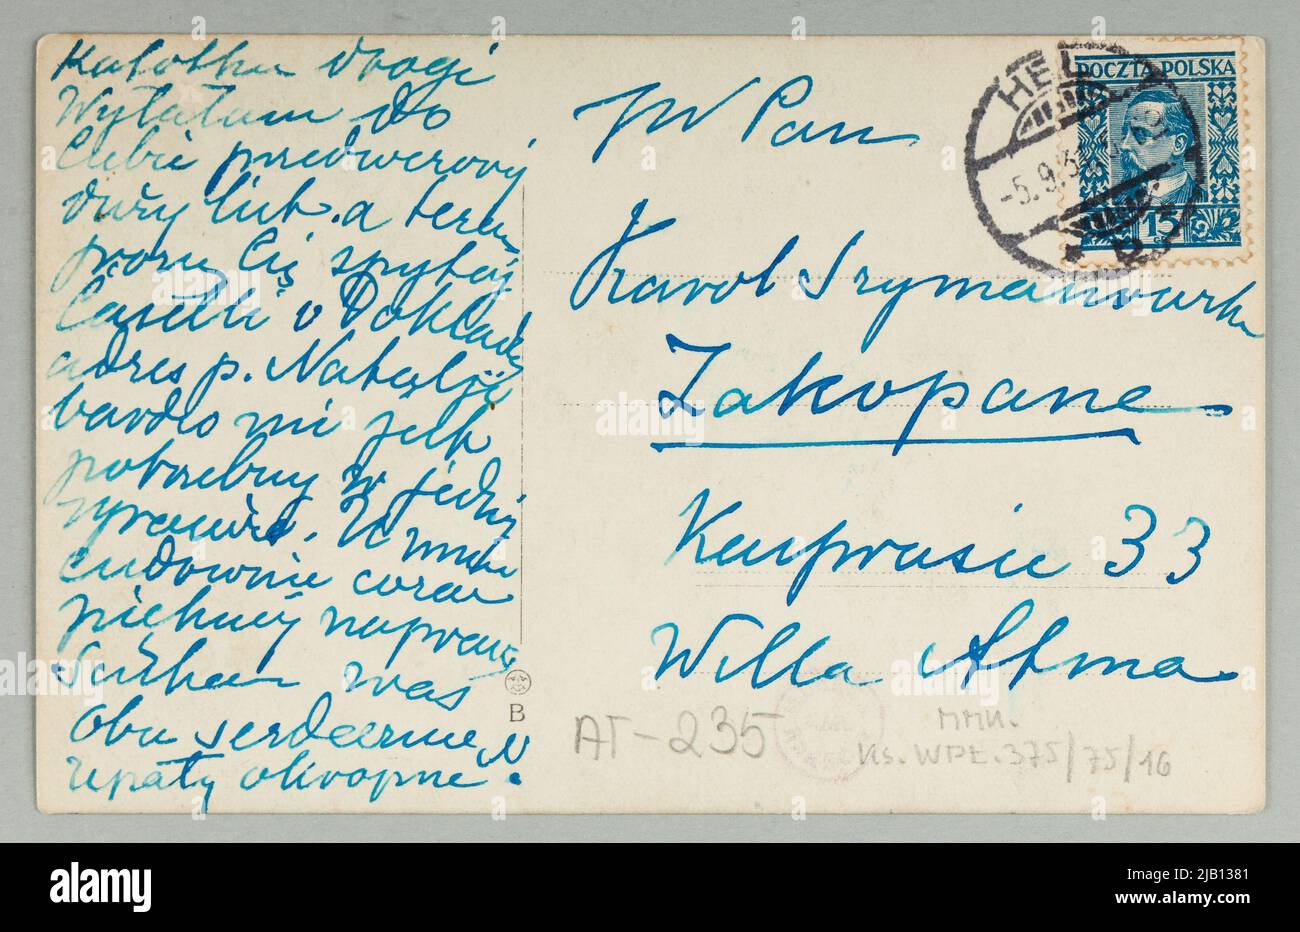 Postcard with a sea view written to Karol Szymanowski to the address ATMY by sister Stanisława regarding the question of Caselli about the address of P. Natalia Szymanowska, Stanisława Stock Photo